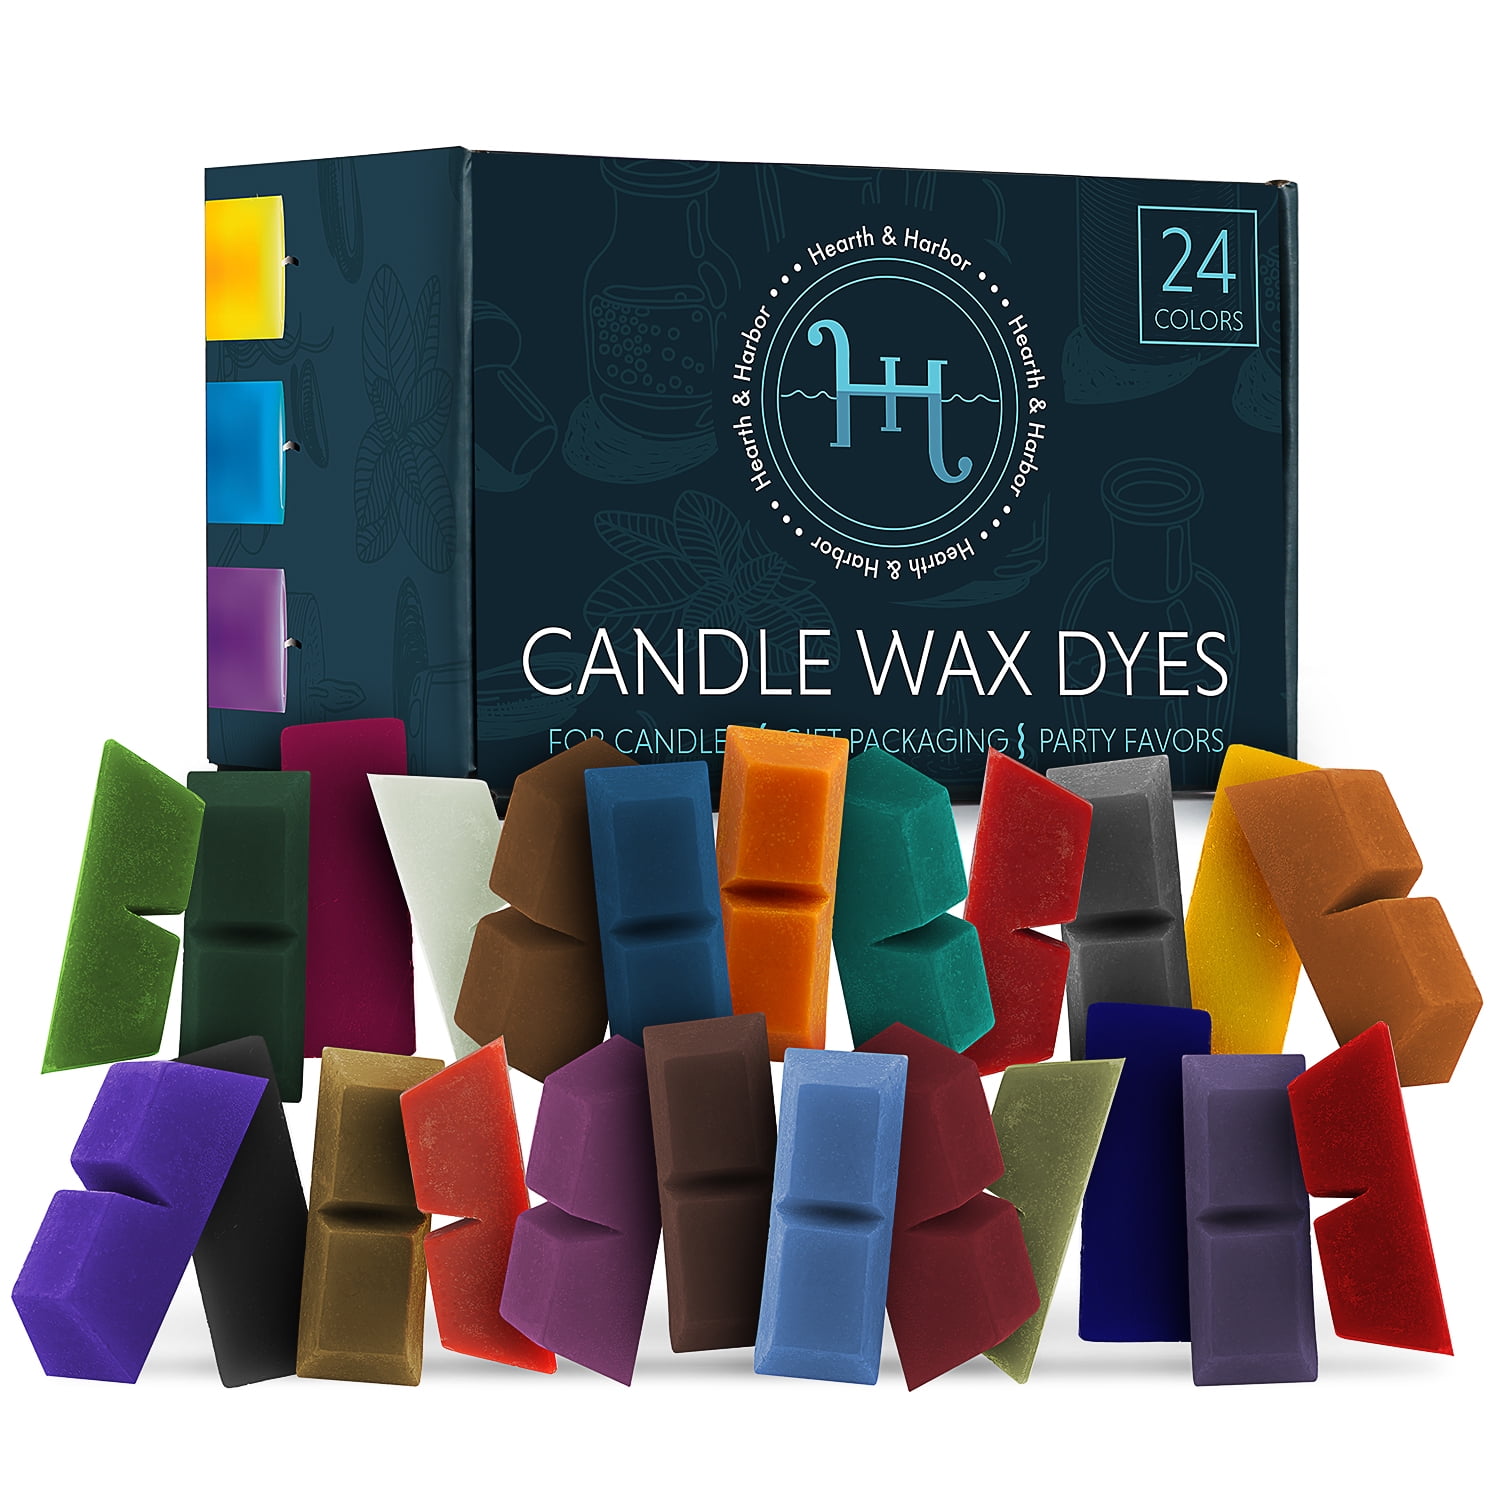 Soy Candle Dyes Soy Wax Dye For Candle Making 24 Colors Set Of Wax Dyes DIY  Scented Candle Paraffin Soy Wax Dye Craft Supplies - AliExpress